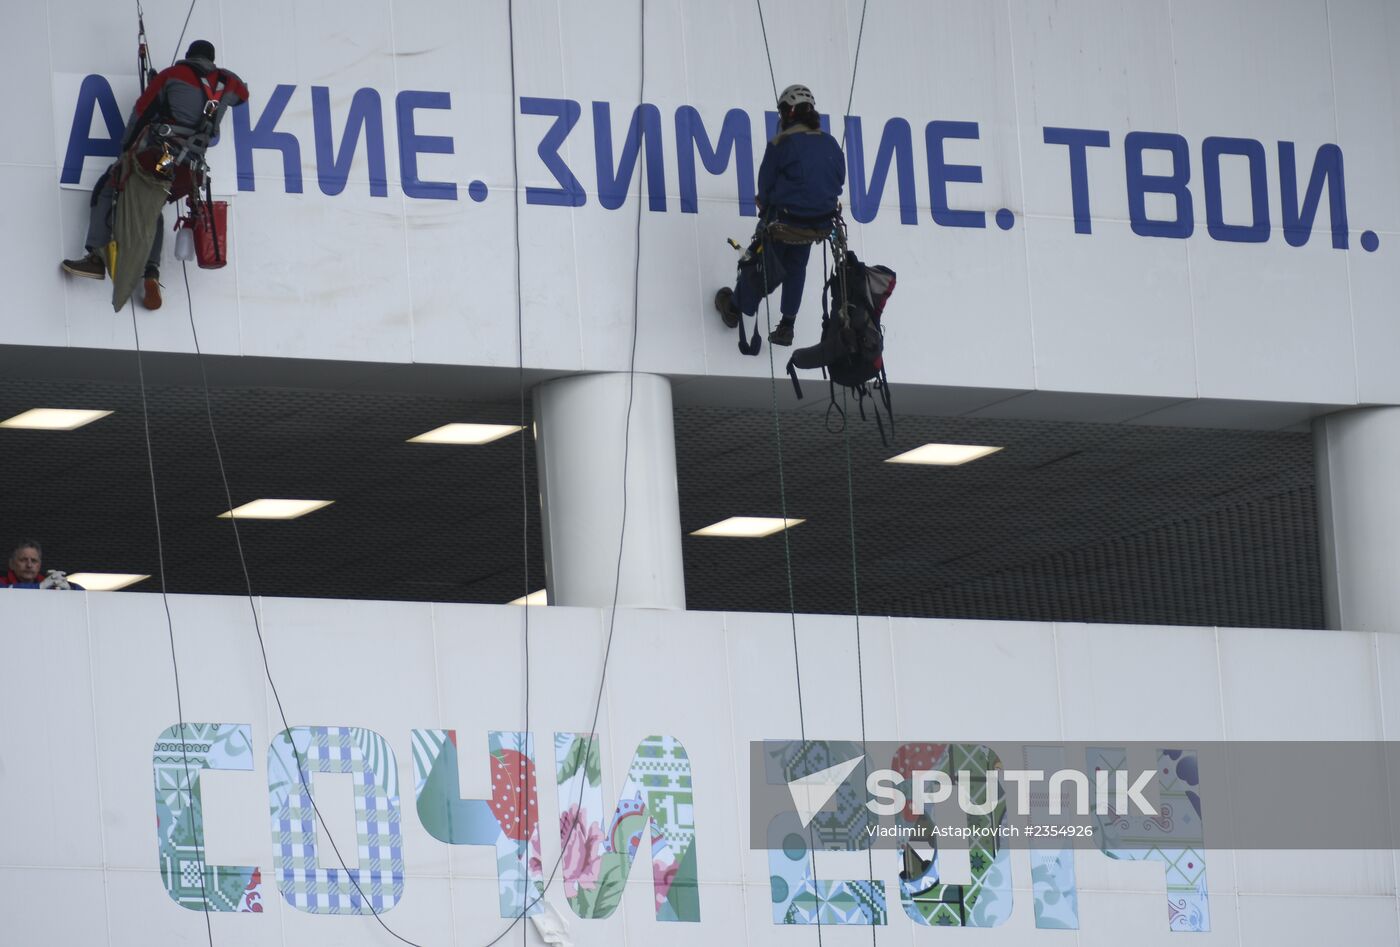 Sochi readies to welcome 22nd Winter Olympic Games